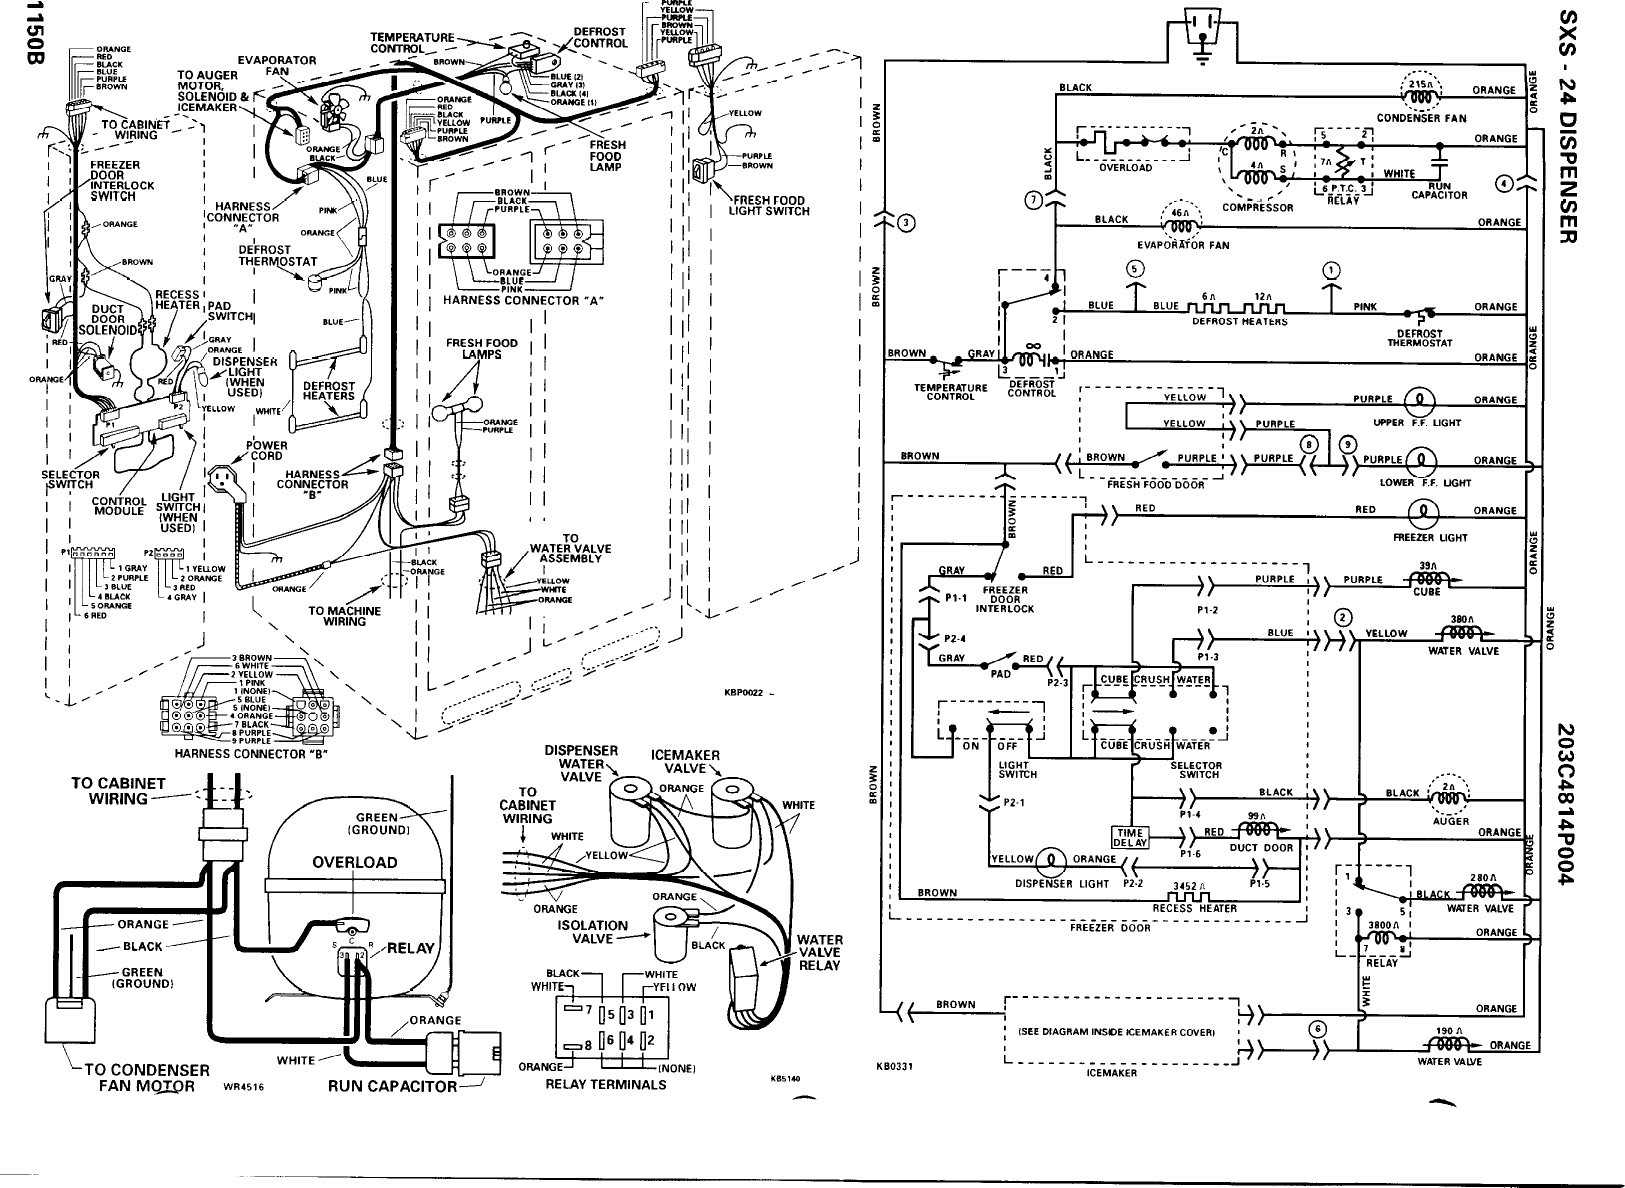 Page 2 of 3 - GE Refrig - Tech Sheet 31-51150